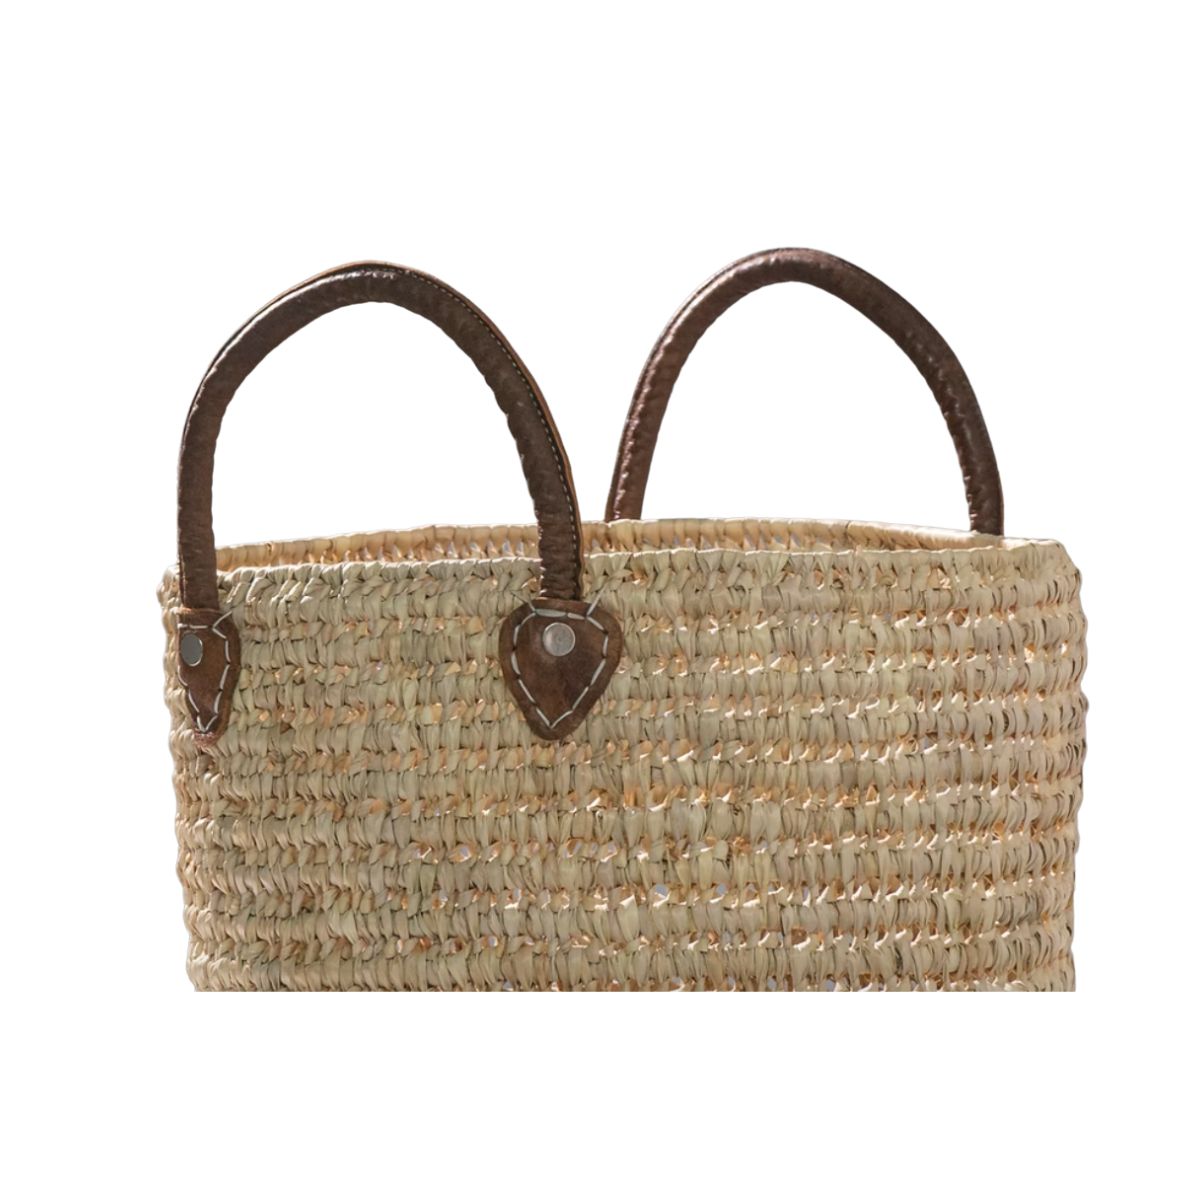 Woven Basket with Leather Handles